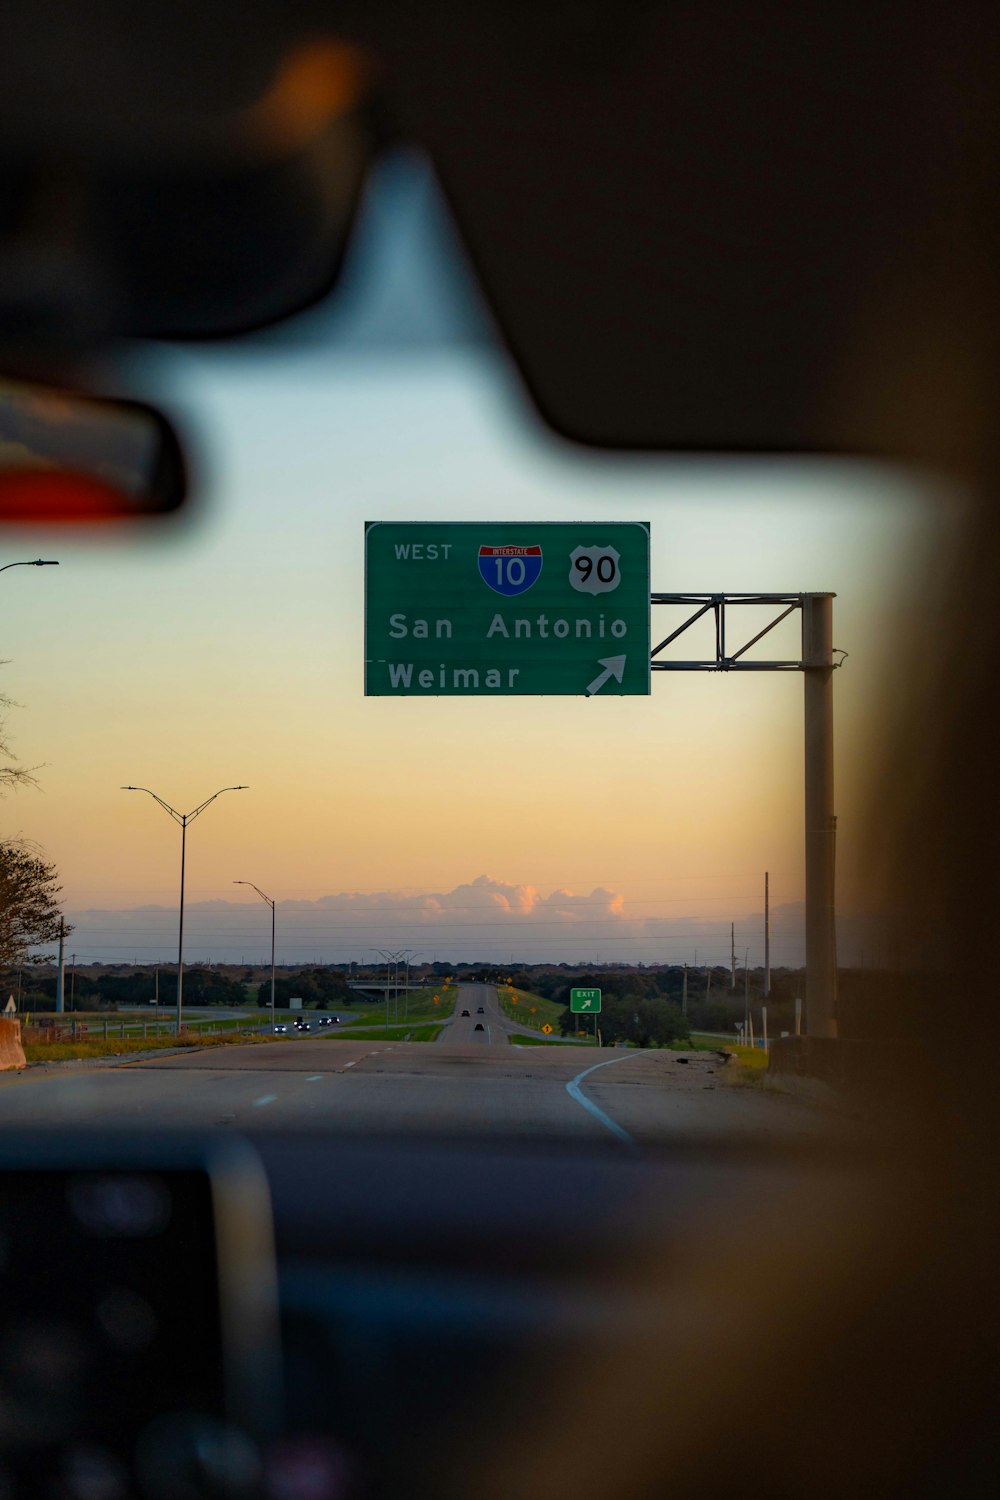 a view of a street sign from inside a car